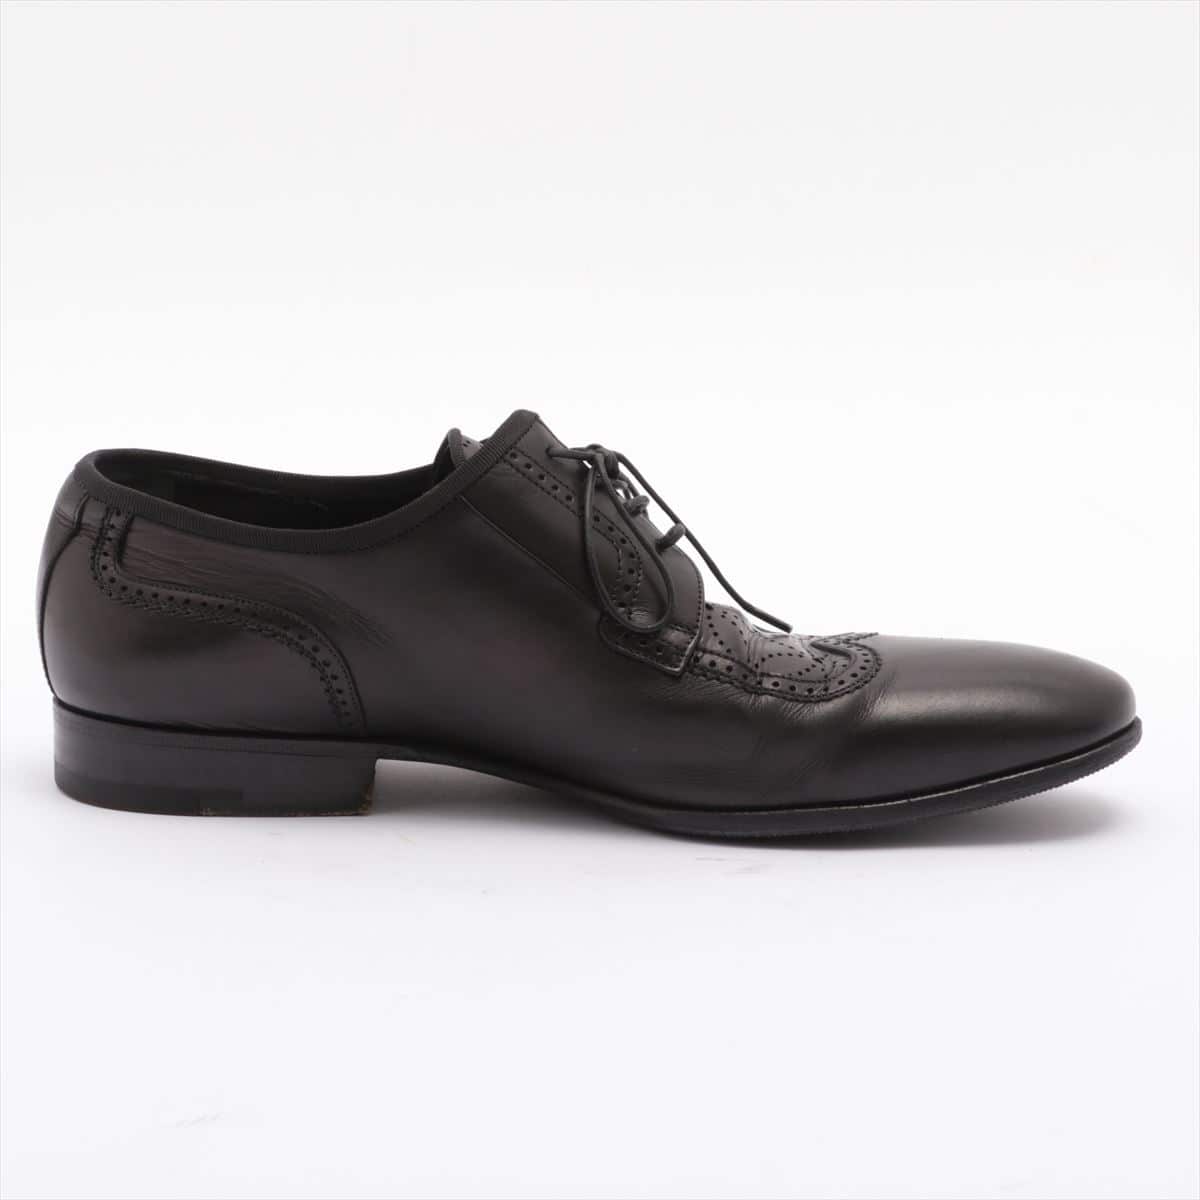 Louis Vuitton ST0037 Leather Leather shoes 7 Men's Black Resoled